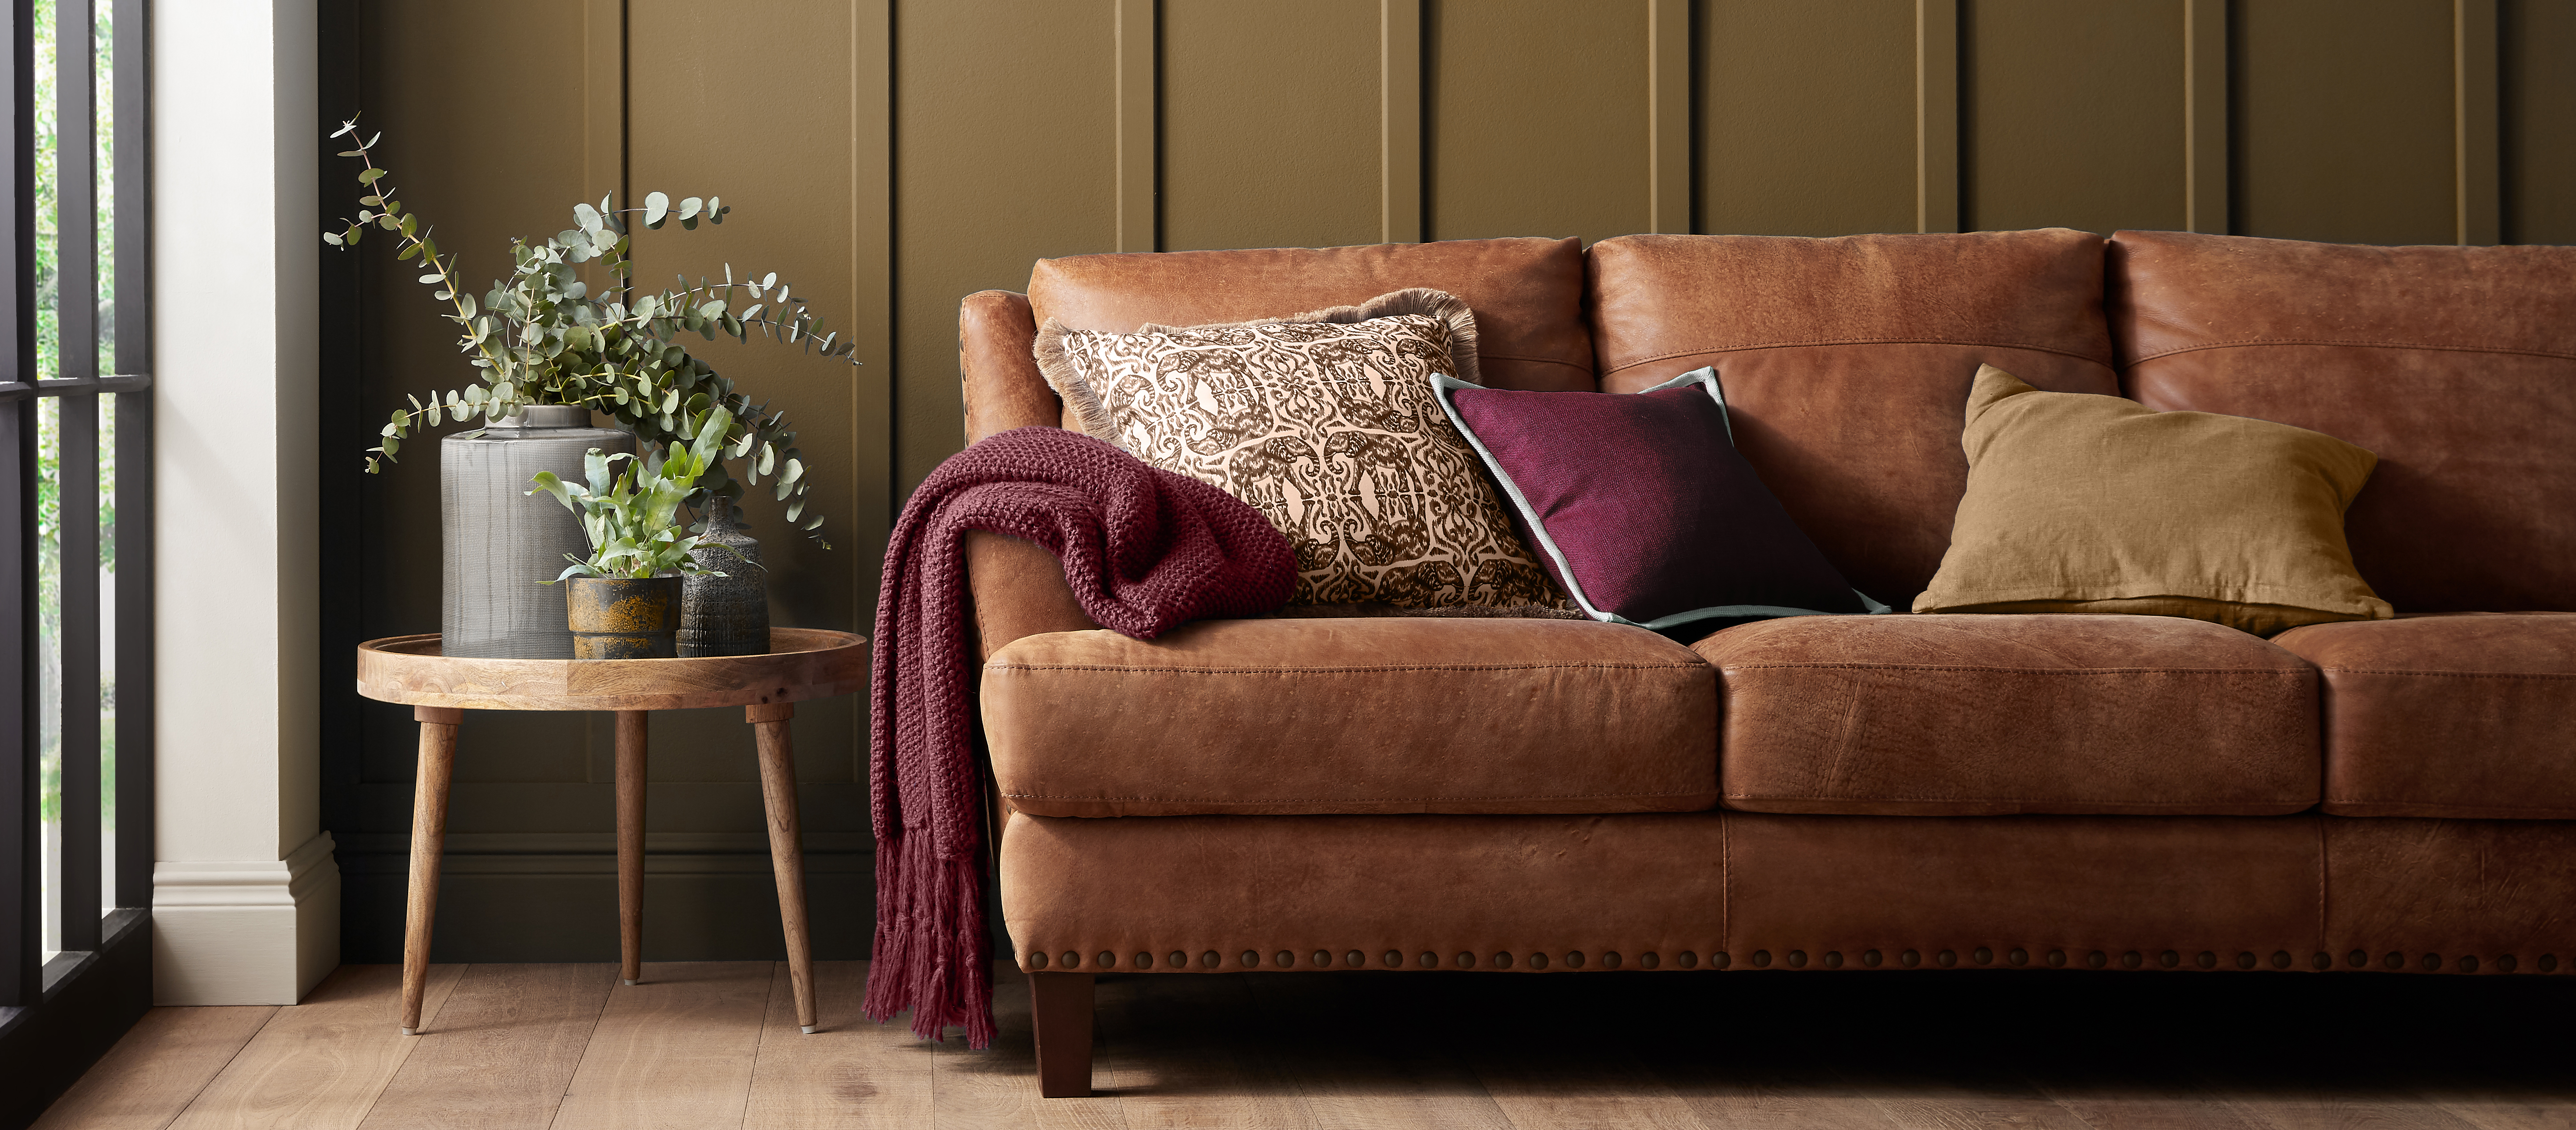 Dulux Colour of the Year: Spiced Honey